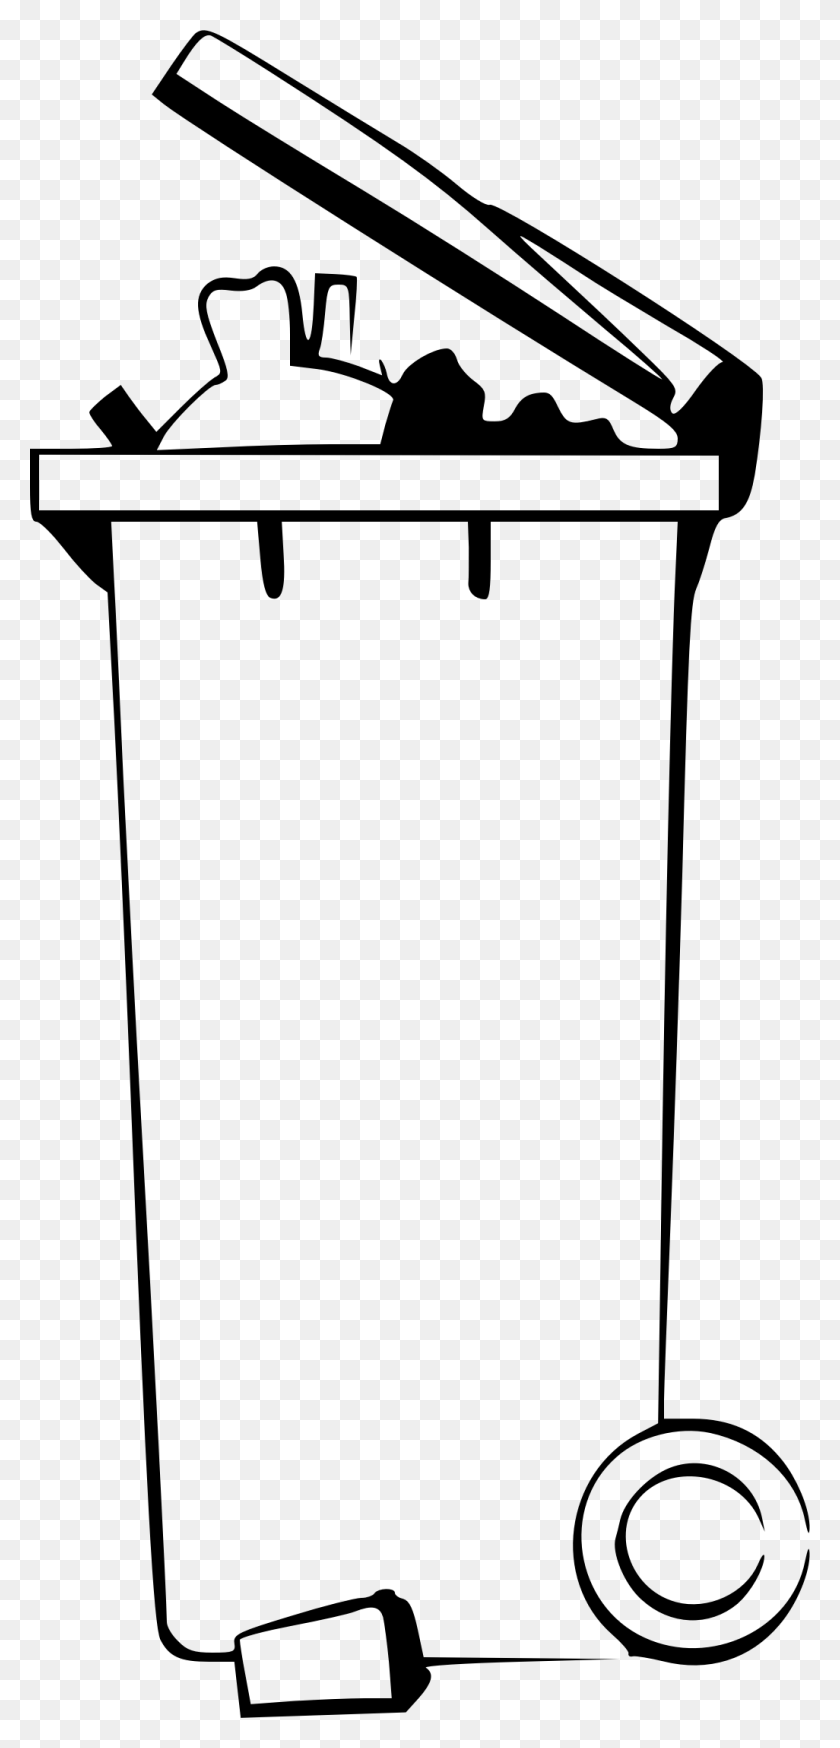 1026x2221 Why Dustbins Weren't Meant To Kick The Harry Potter Lexicon - Hogwarts Letter Clipart